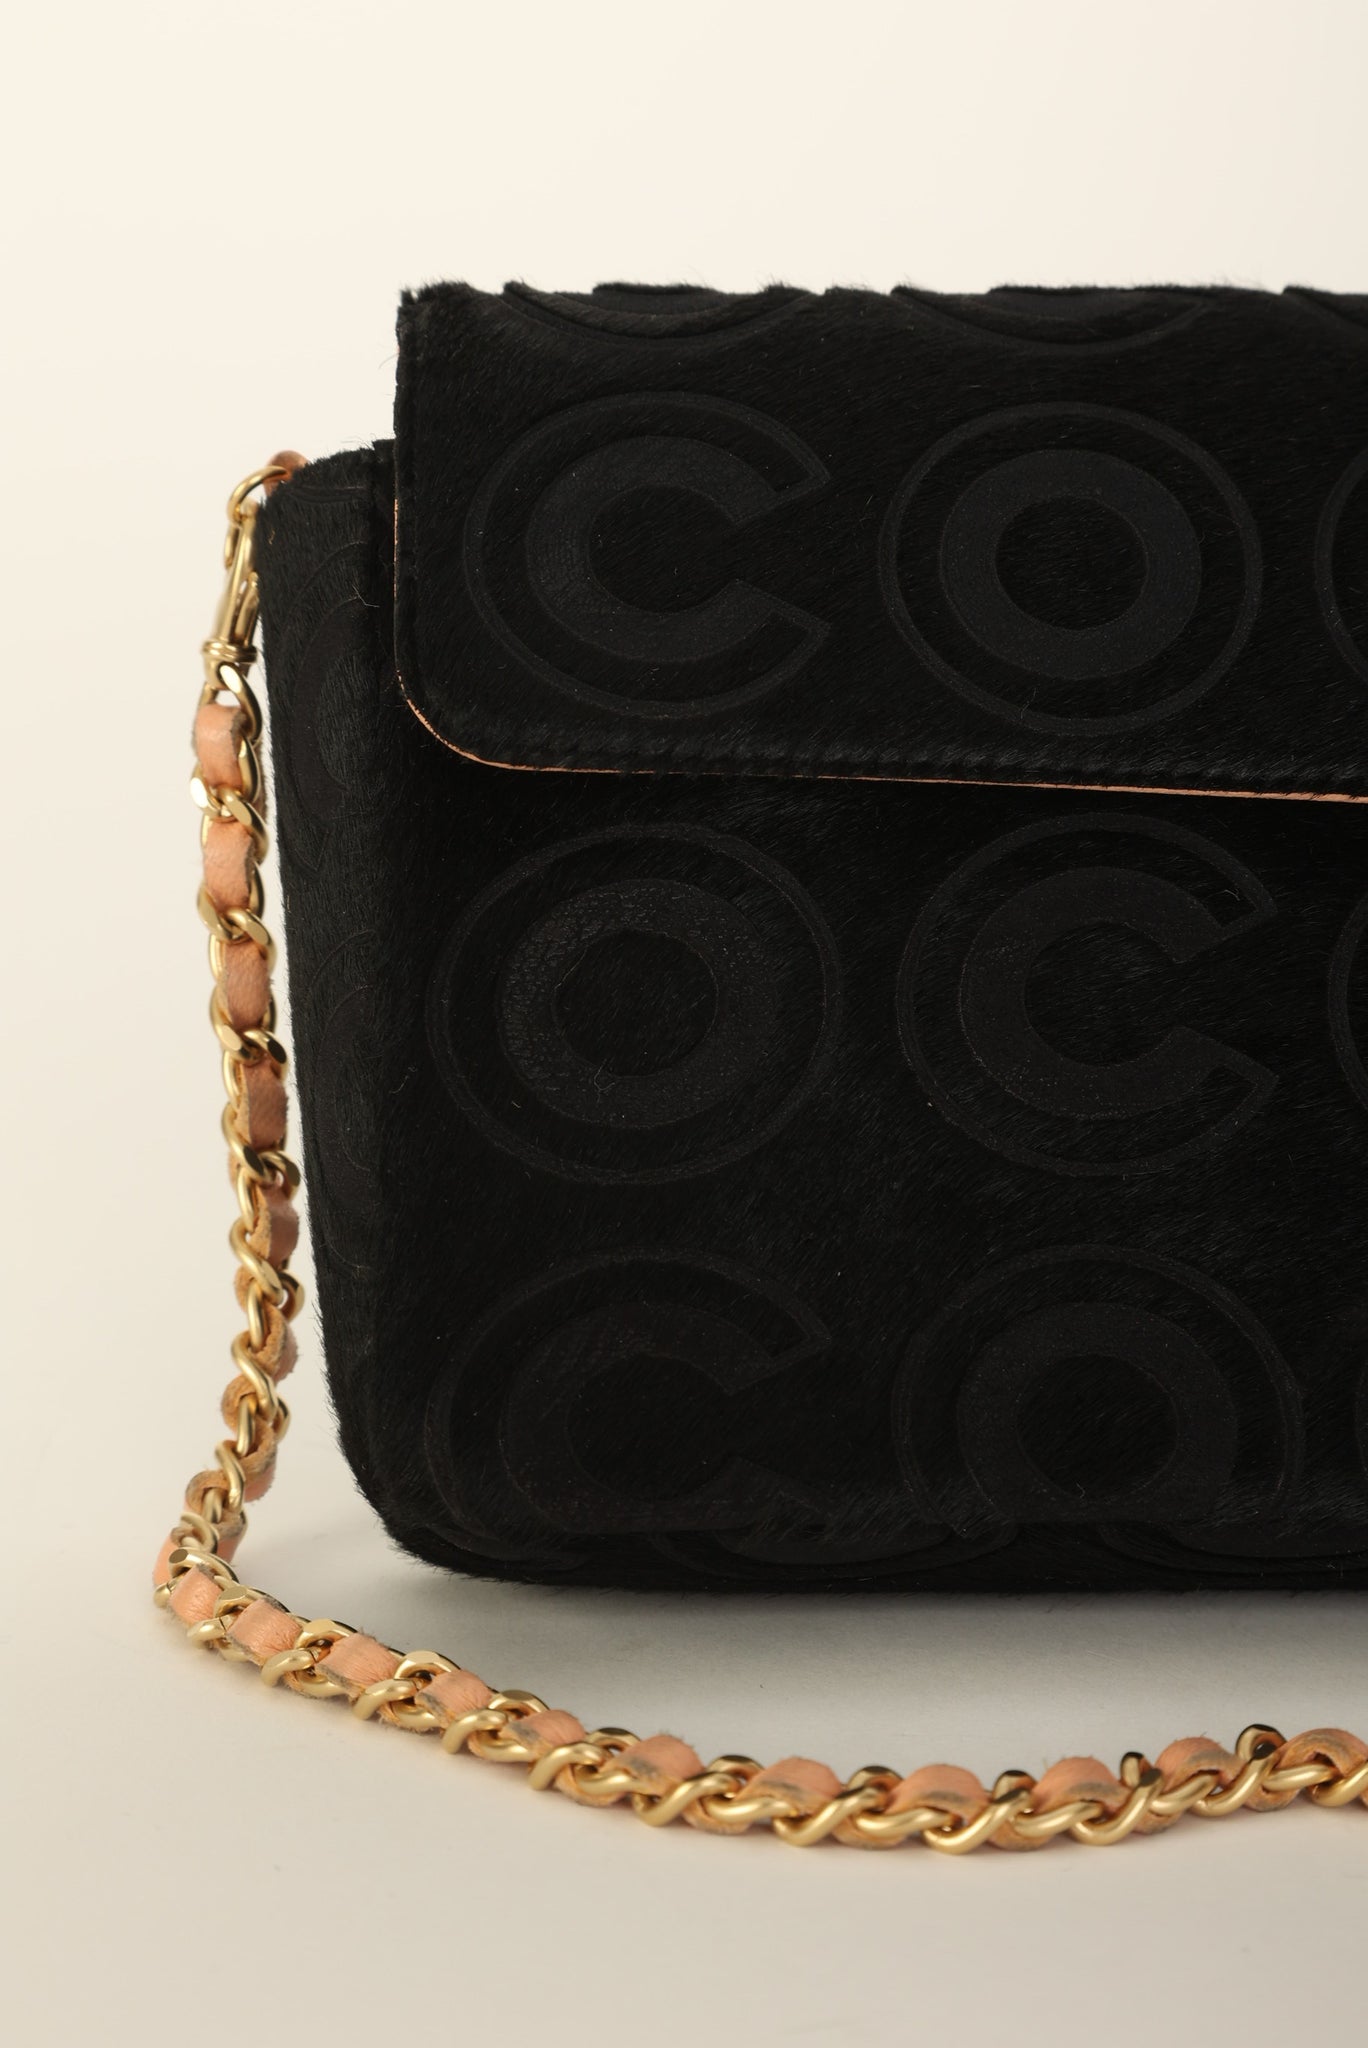 Chanel 2000 Ponyhair Coco East West Flap